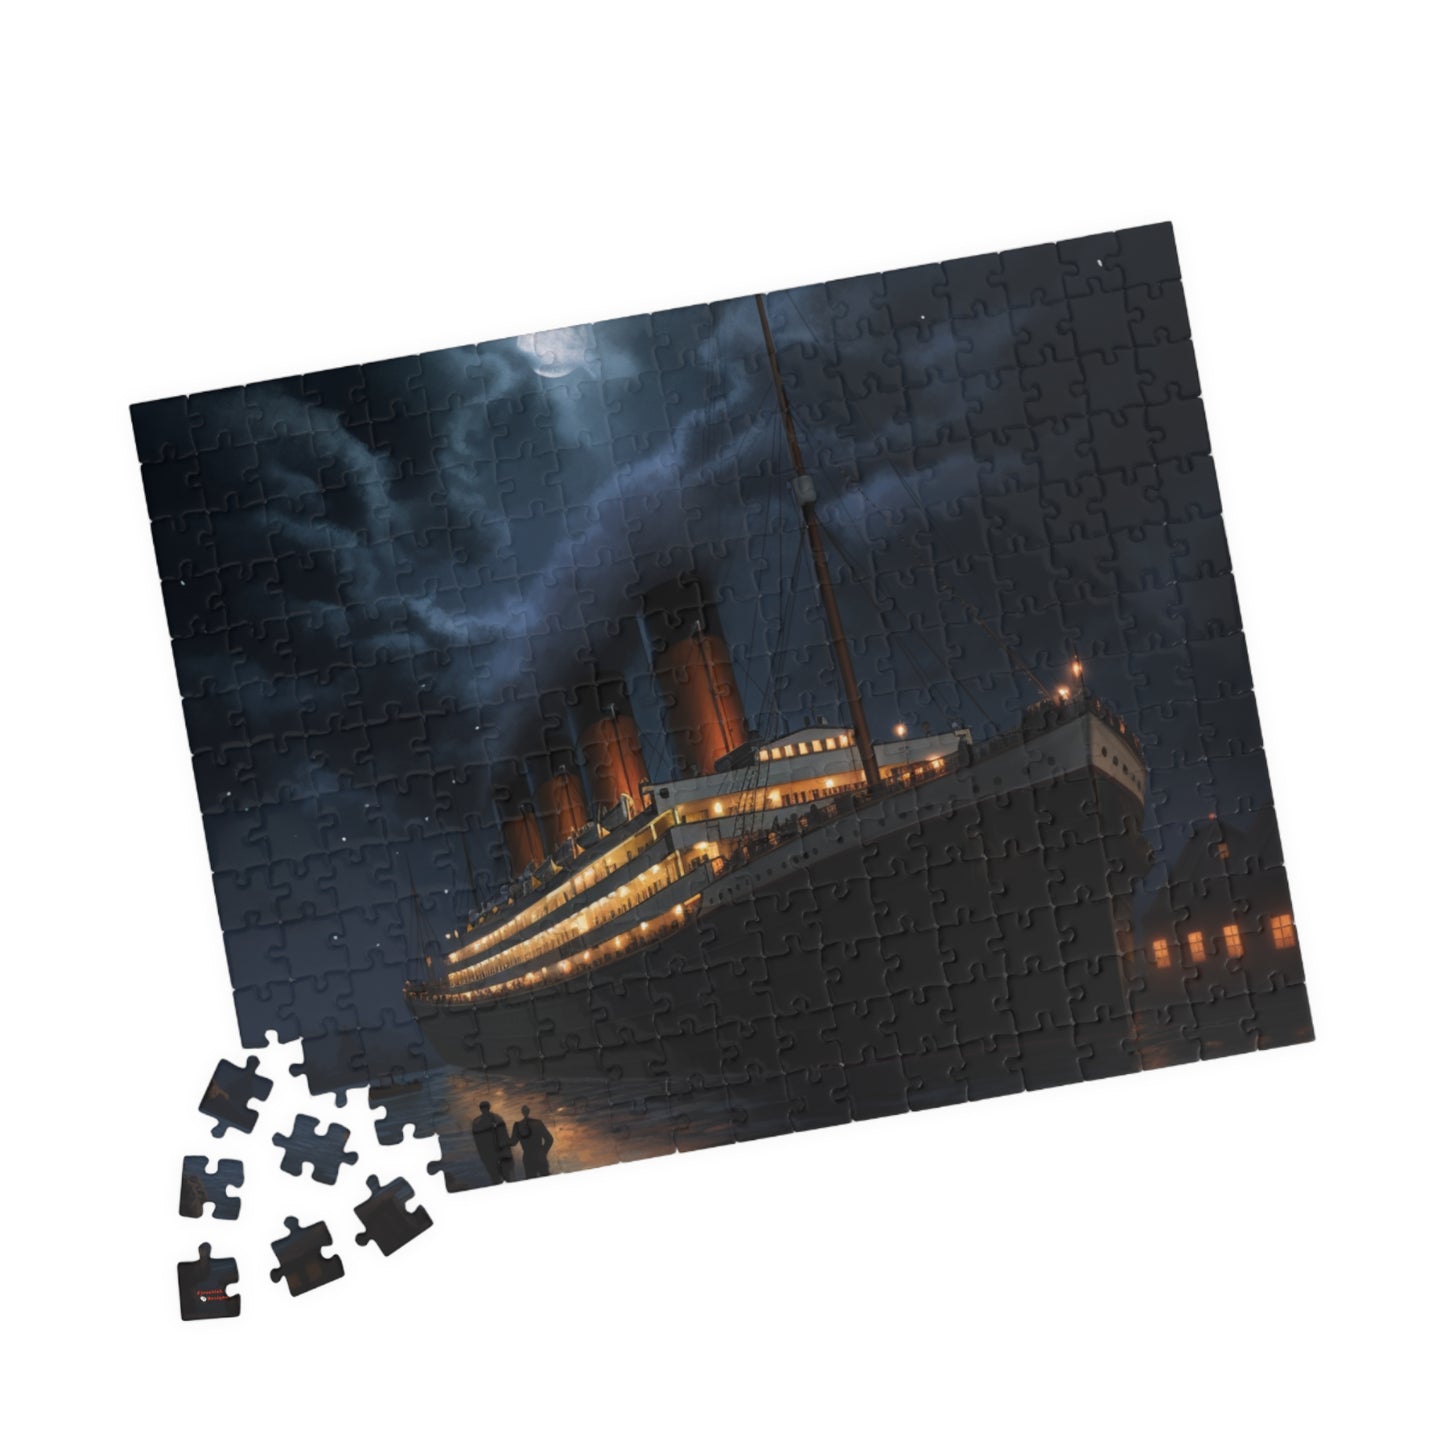 RMS Titanic Moonlit Puzzle (110, 252, 500, 1014-piece) By Firechick Designs | Jigsaw Ocean Liner Cruise Ship Vessel Boat Craft Queen Mary